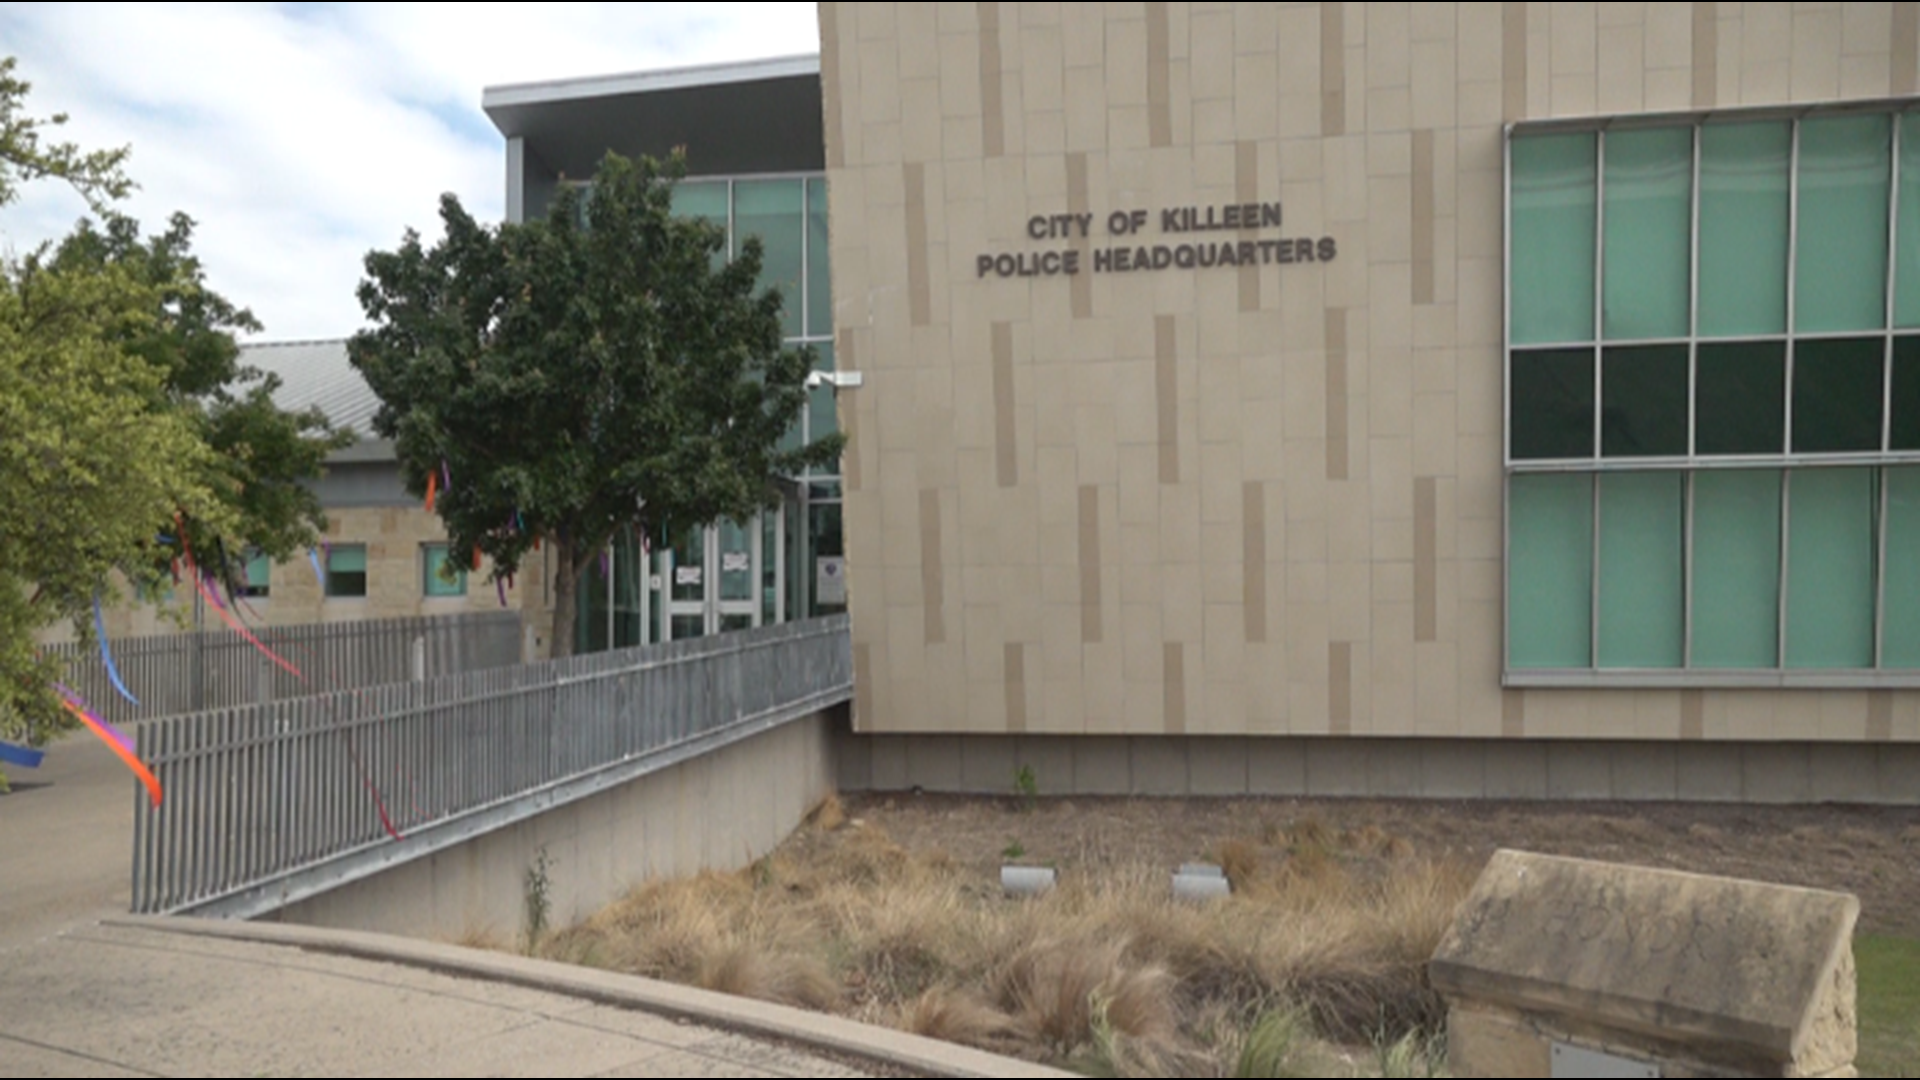 Attempts at change are evident in Killeen as Chief Kimble recently presented to the city council about ending no-knock warrants.